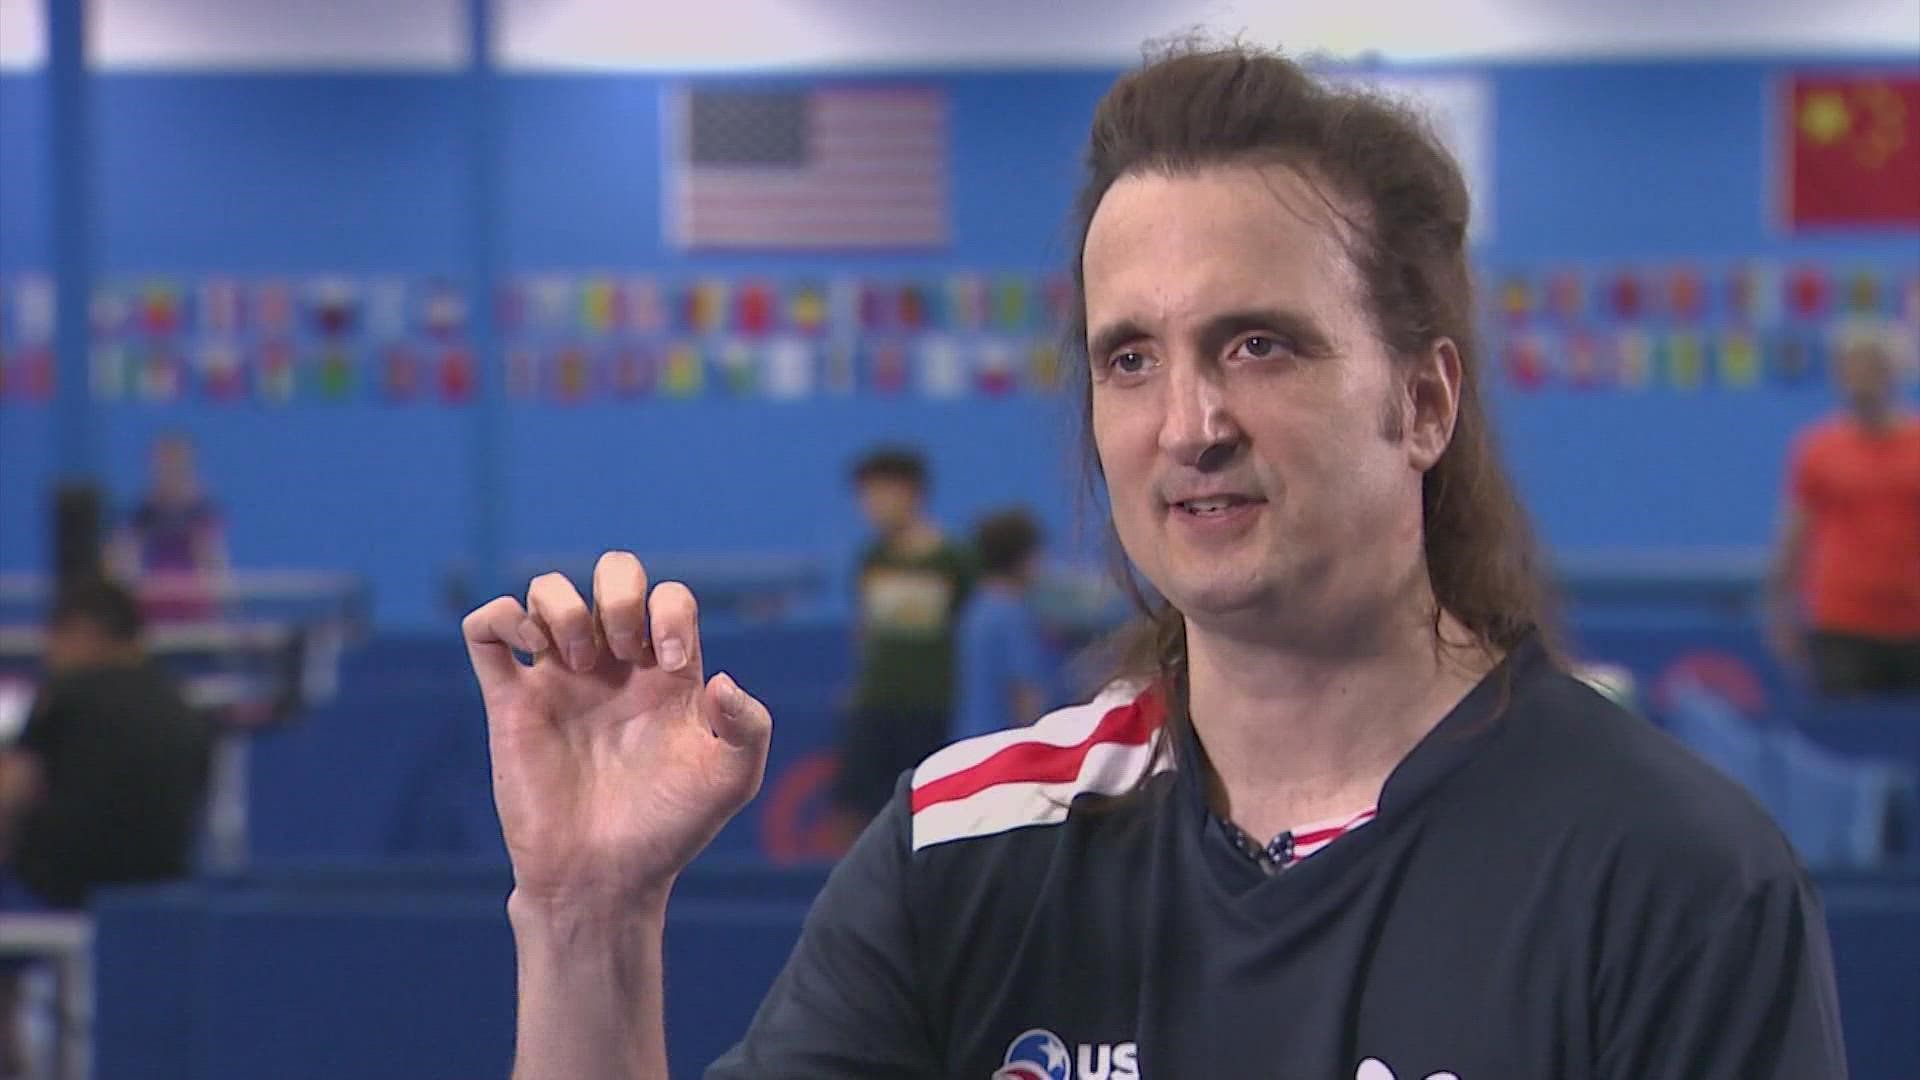 He's one of America's greatest table tennis players and he calls Houston home. How he got here is part of his incredible story.